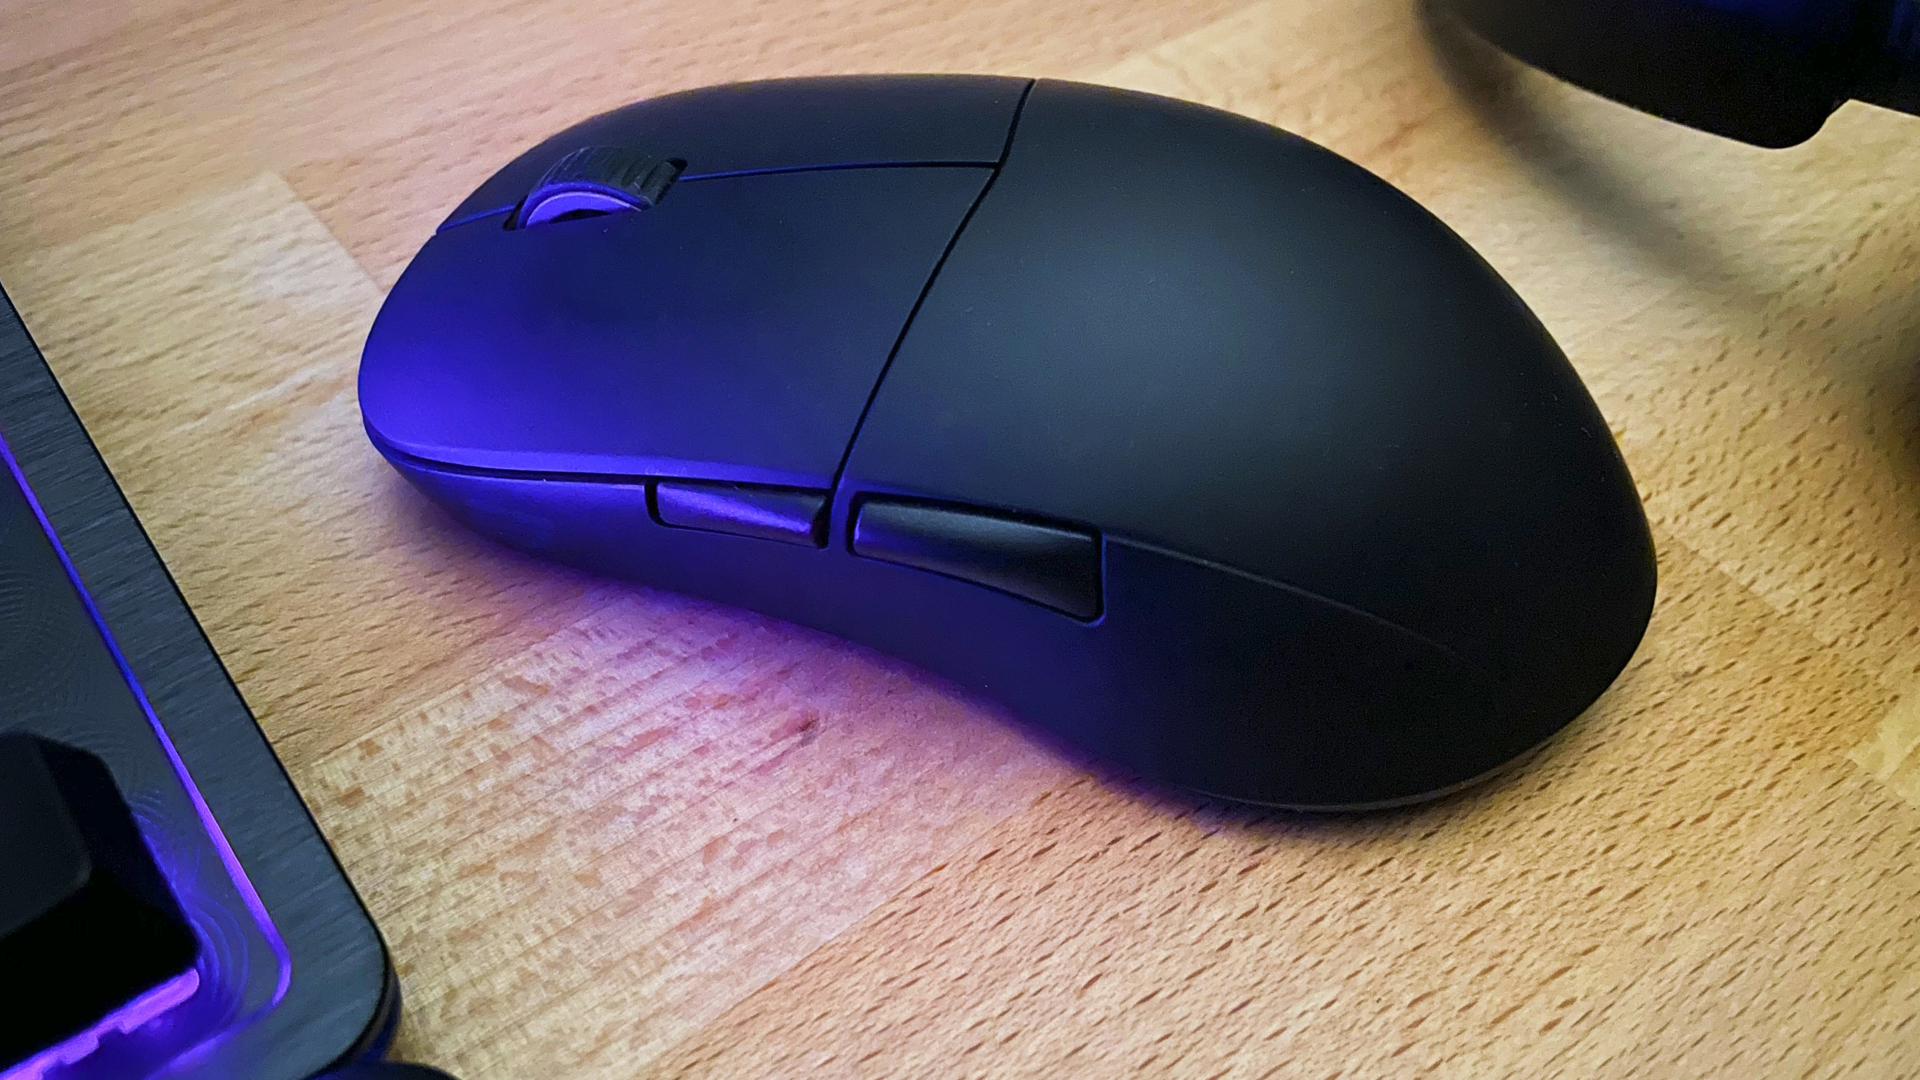 Endgame Gear XM2we wireless gaming mouse review | PC Gamer